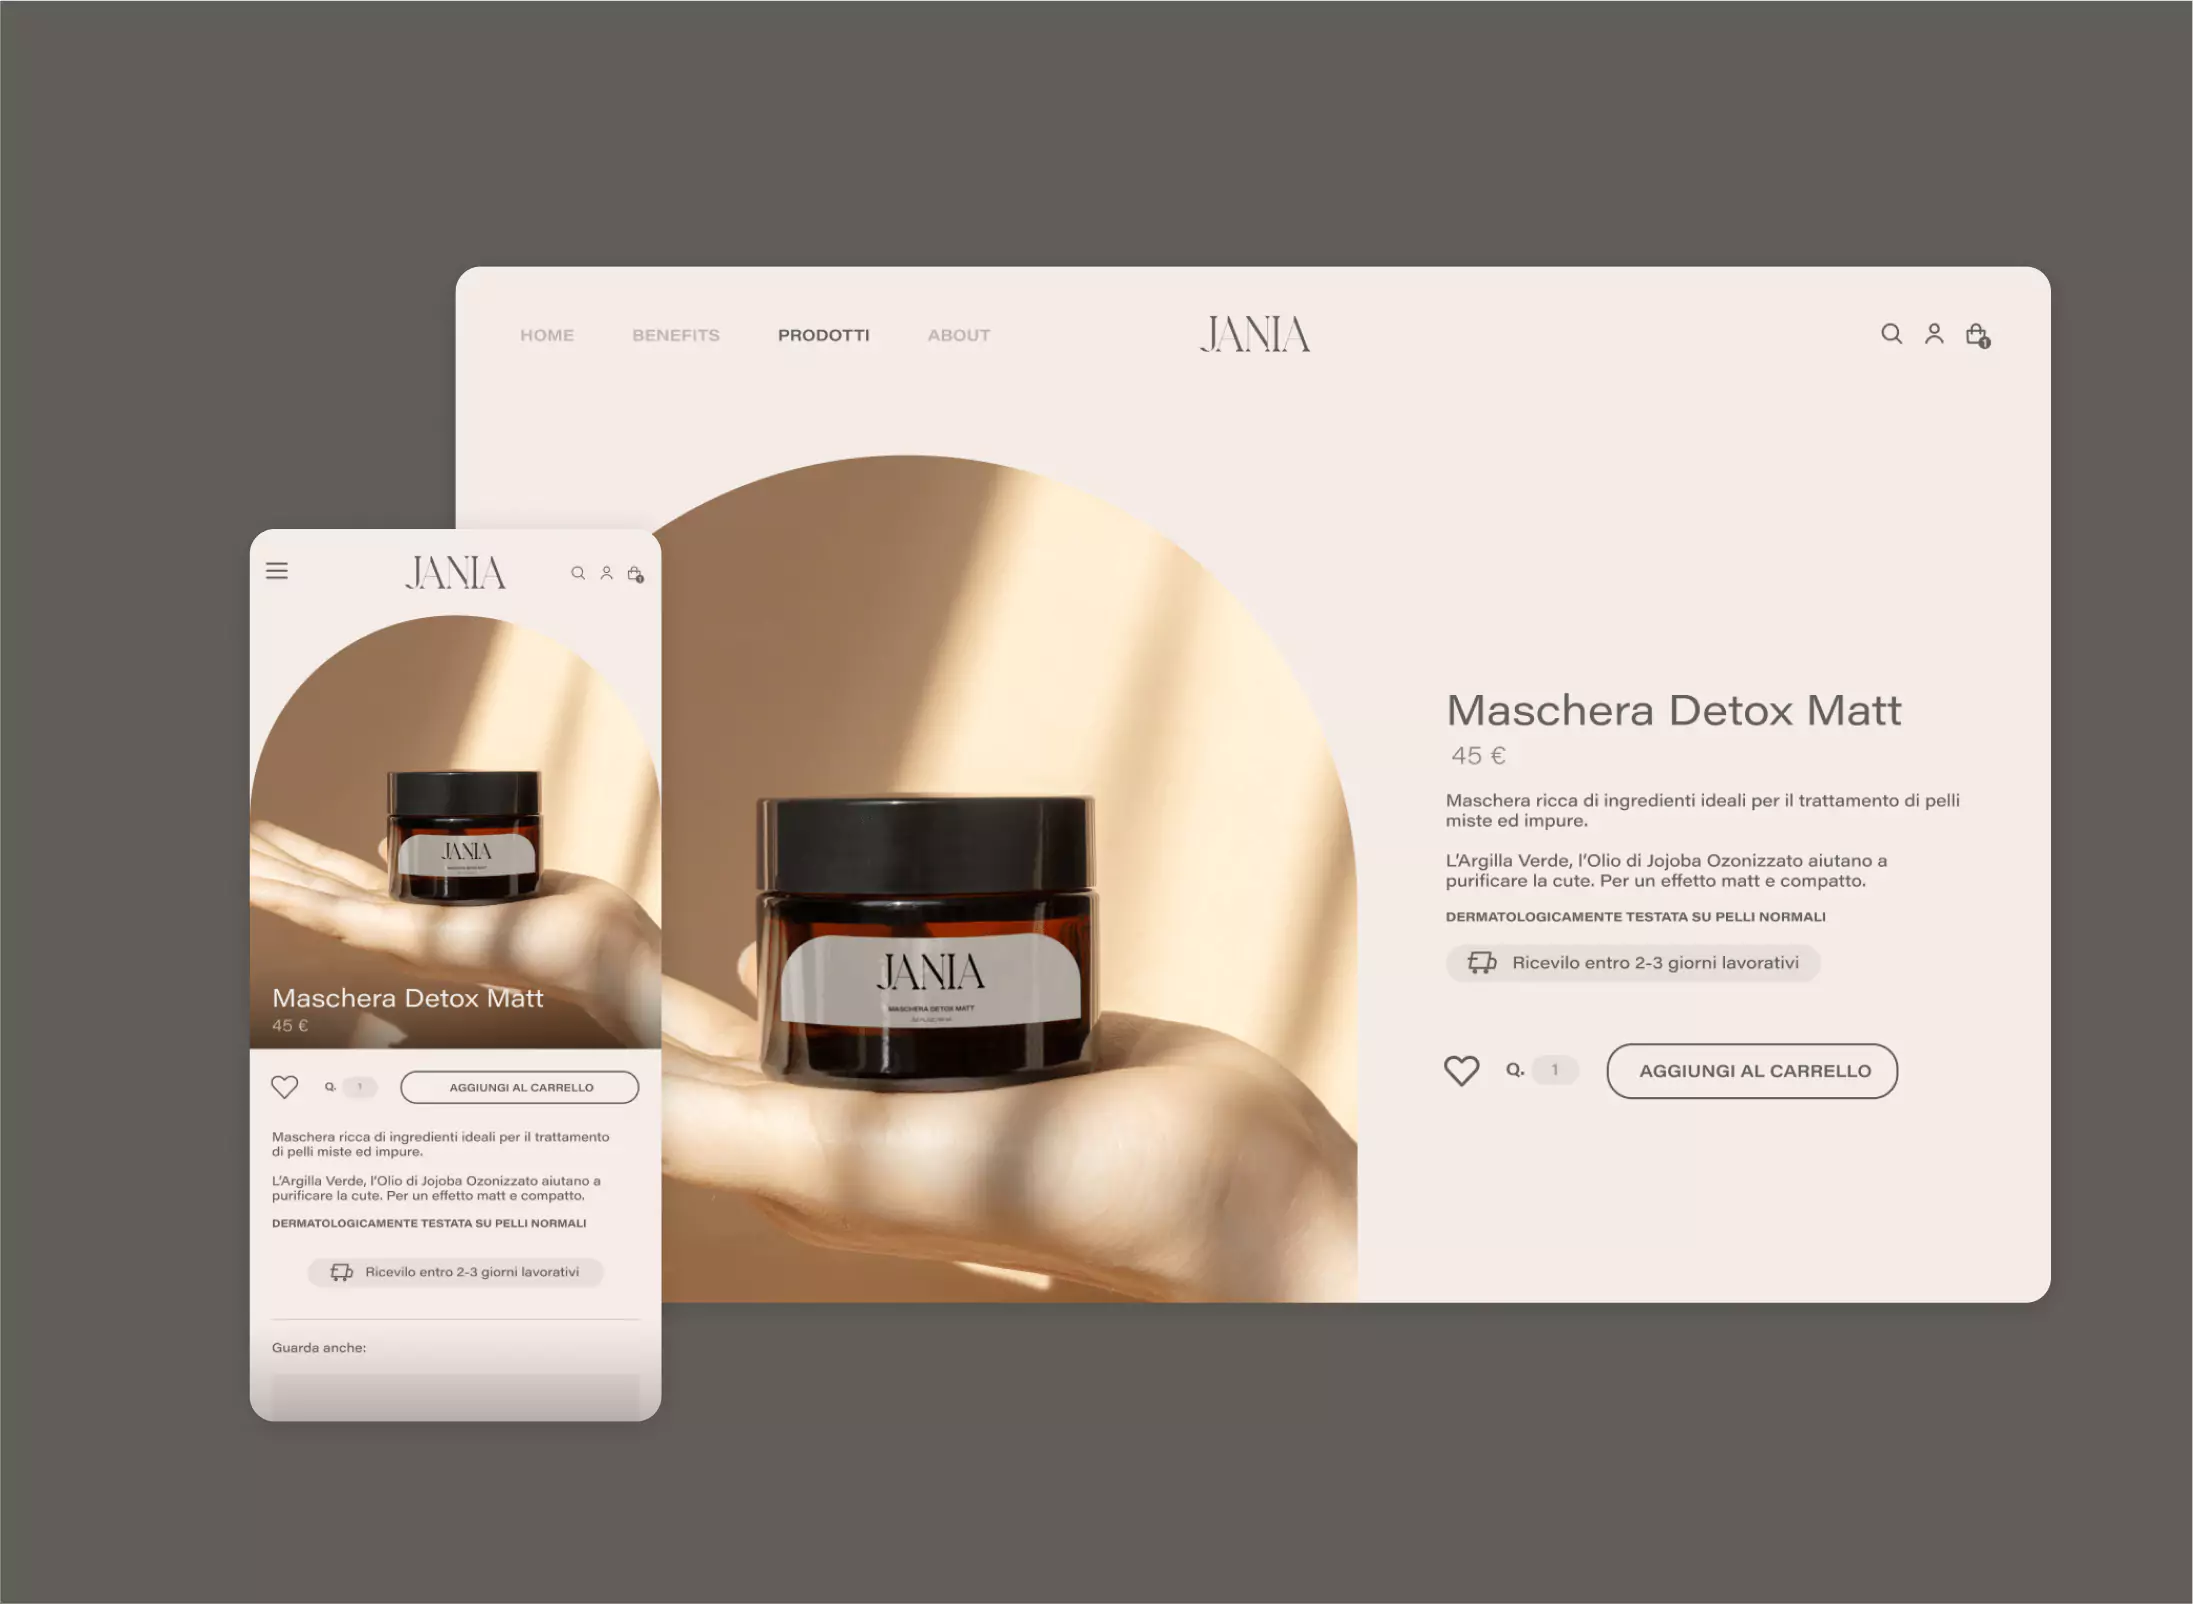 Brand Identity for Jania - Website Product Pages Design